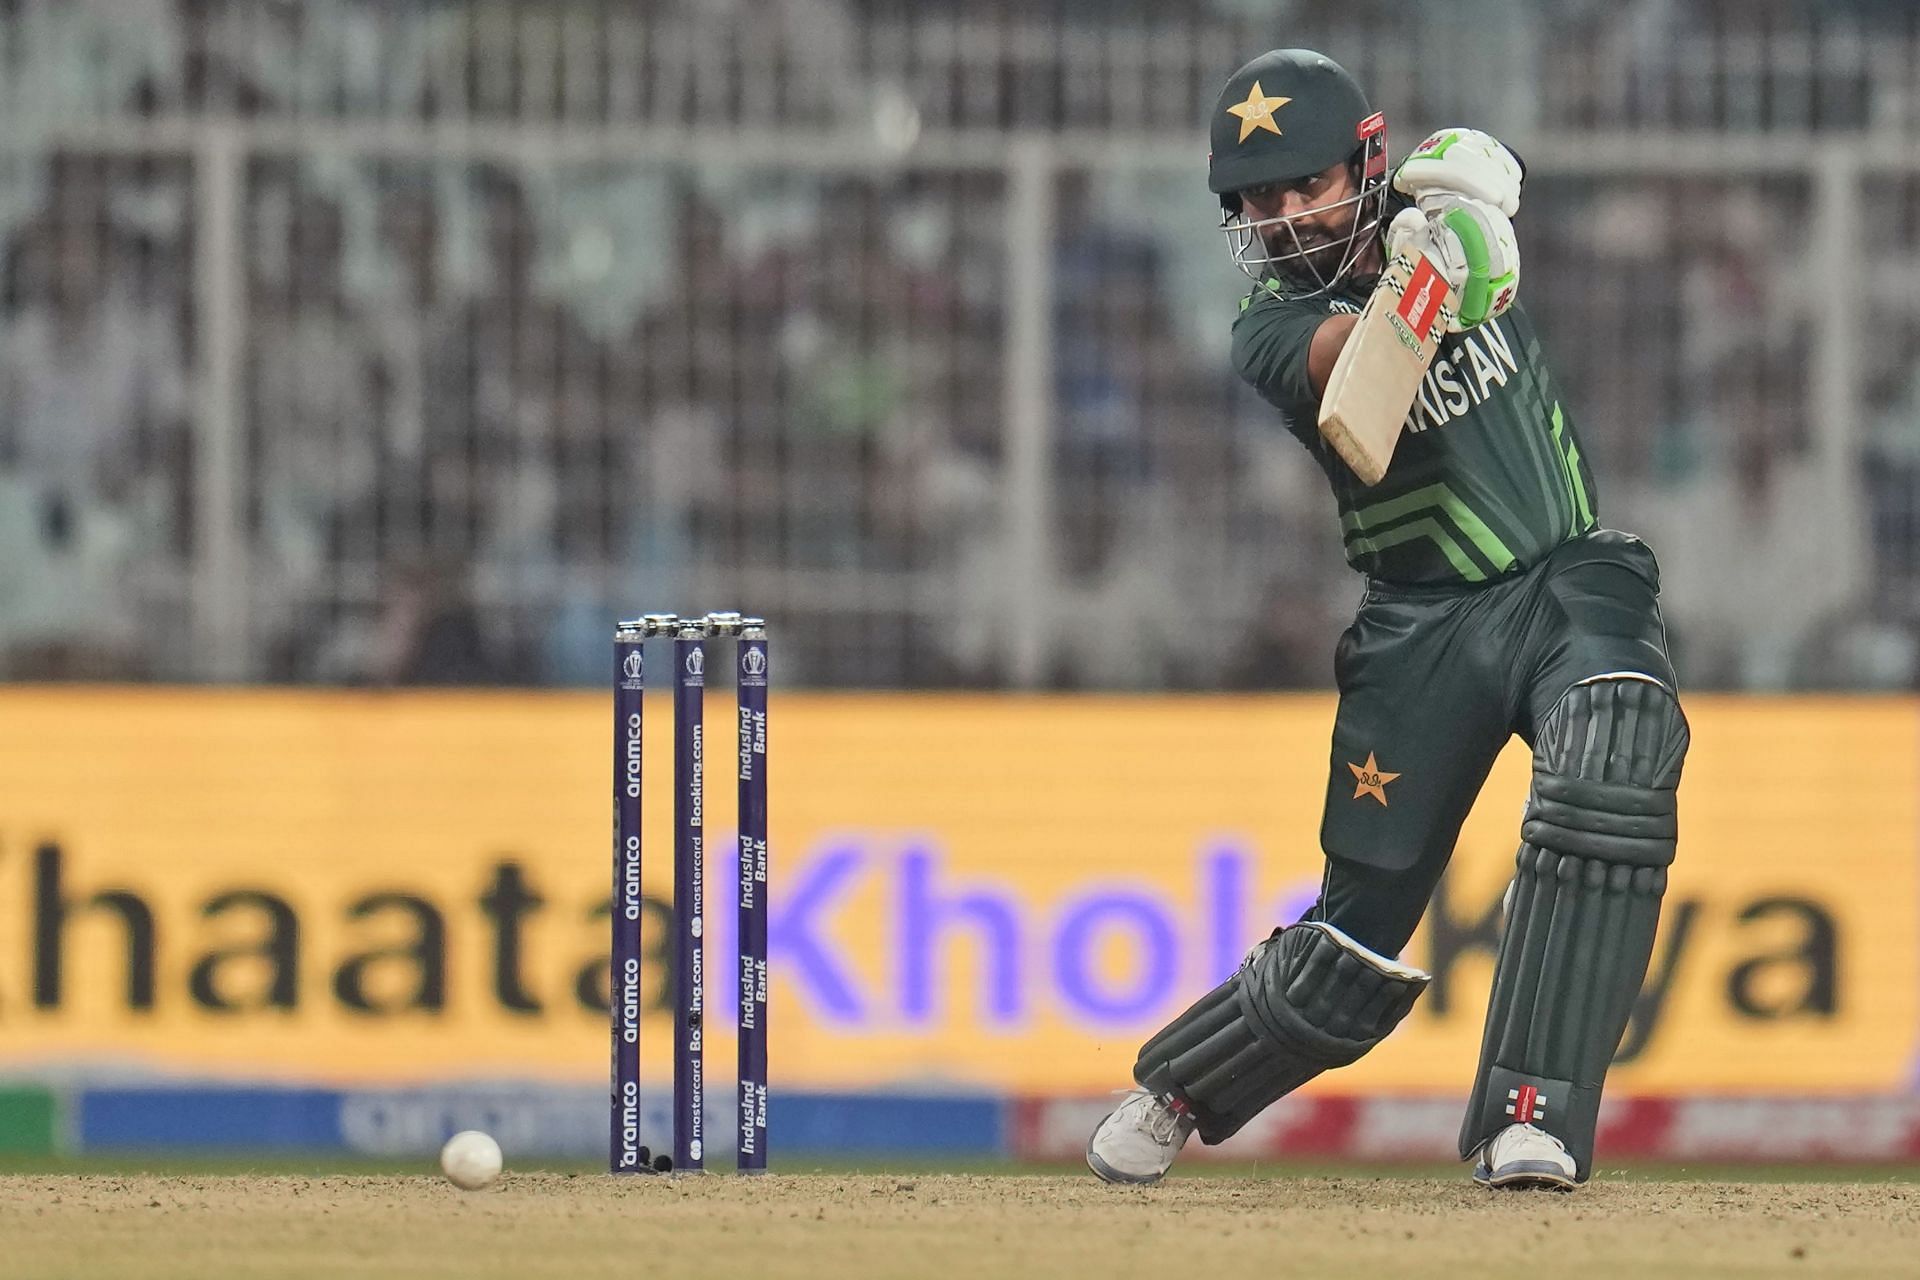 Babar Azam has been criticized for his failure to convert his starts into substantial efforts. [P/C: AP]